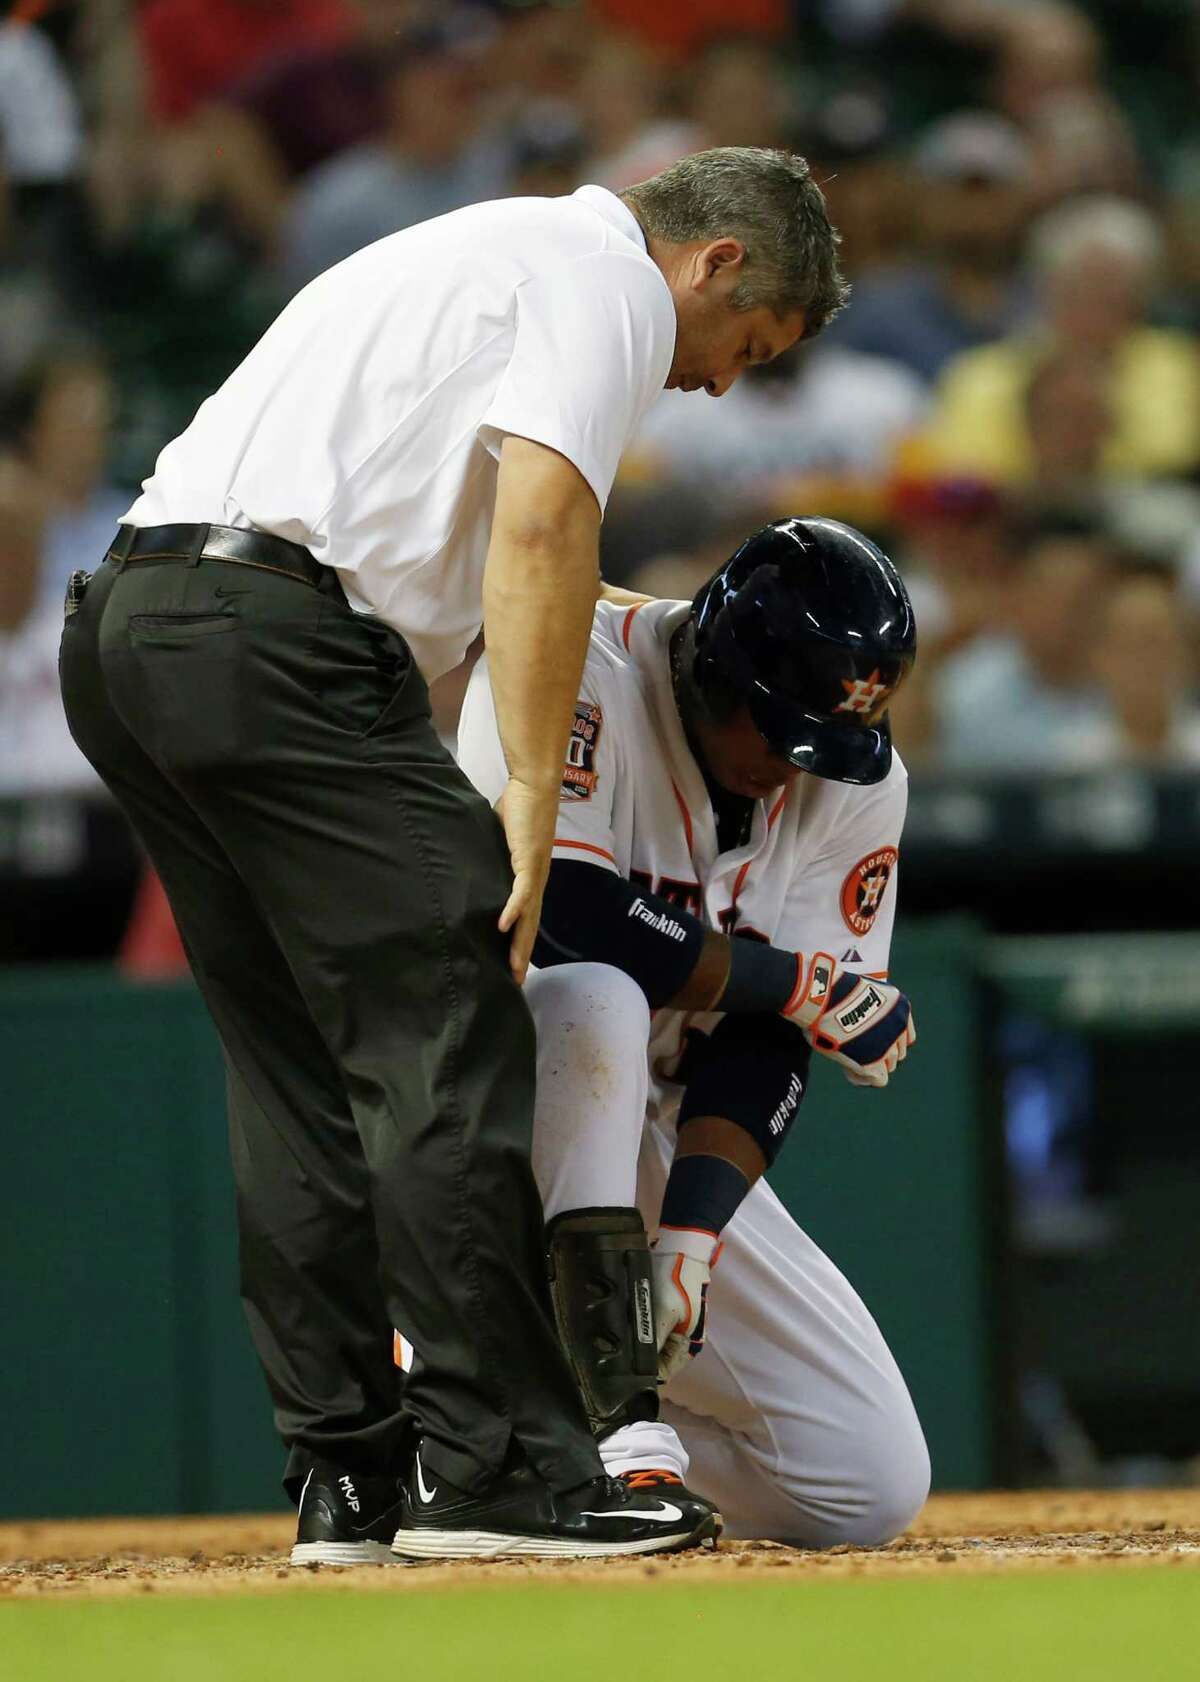 Astros third baseman Luis Valbuena was dishing out and taking punishment Tuesday night. He homered in the third, needed attention from trainer Nate Lucero, left, after being hit by a pitch in the fifth, and let loose after scoring an insurance run in the eighth, right.